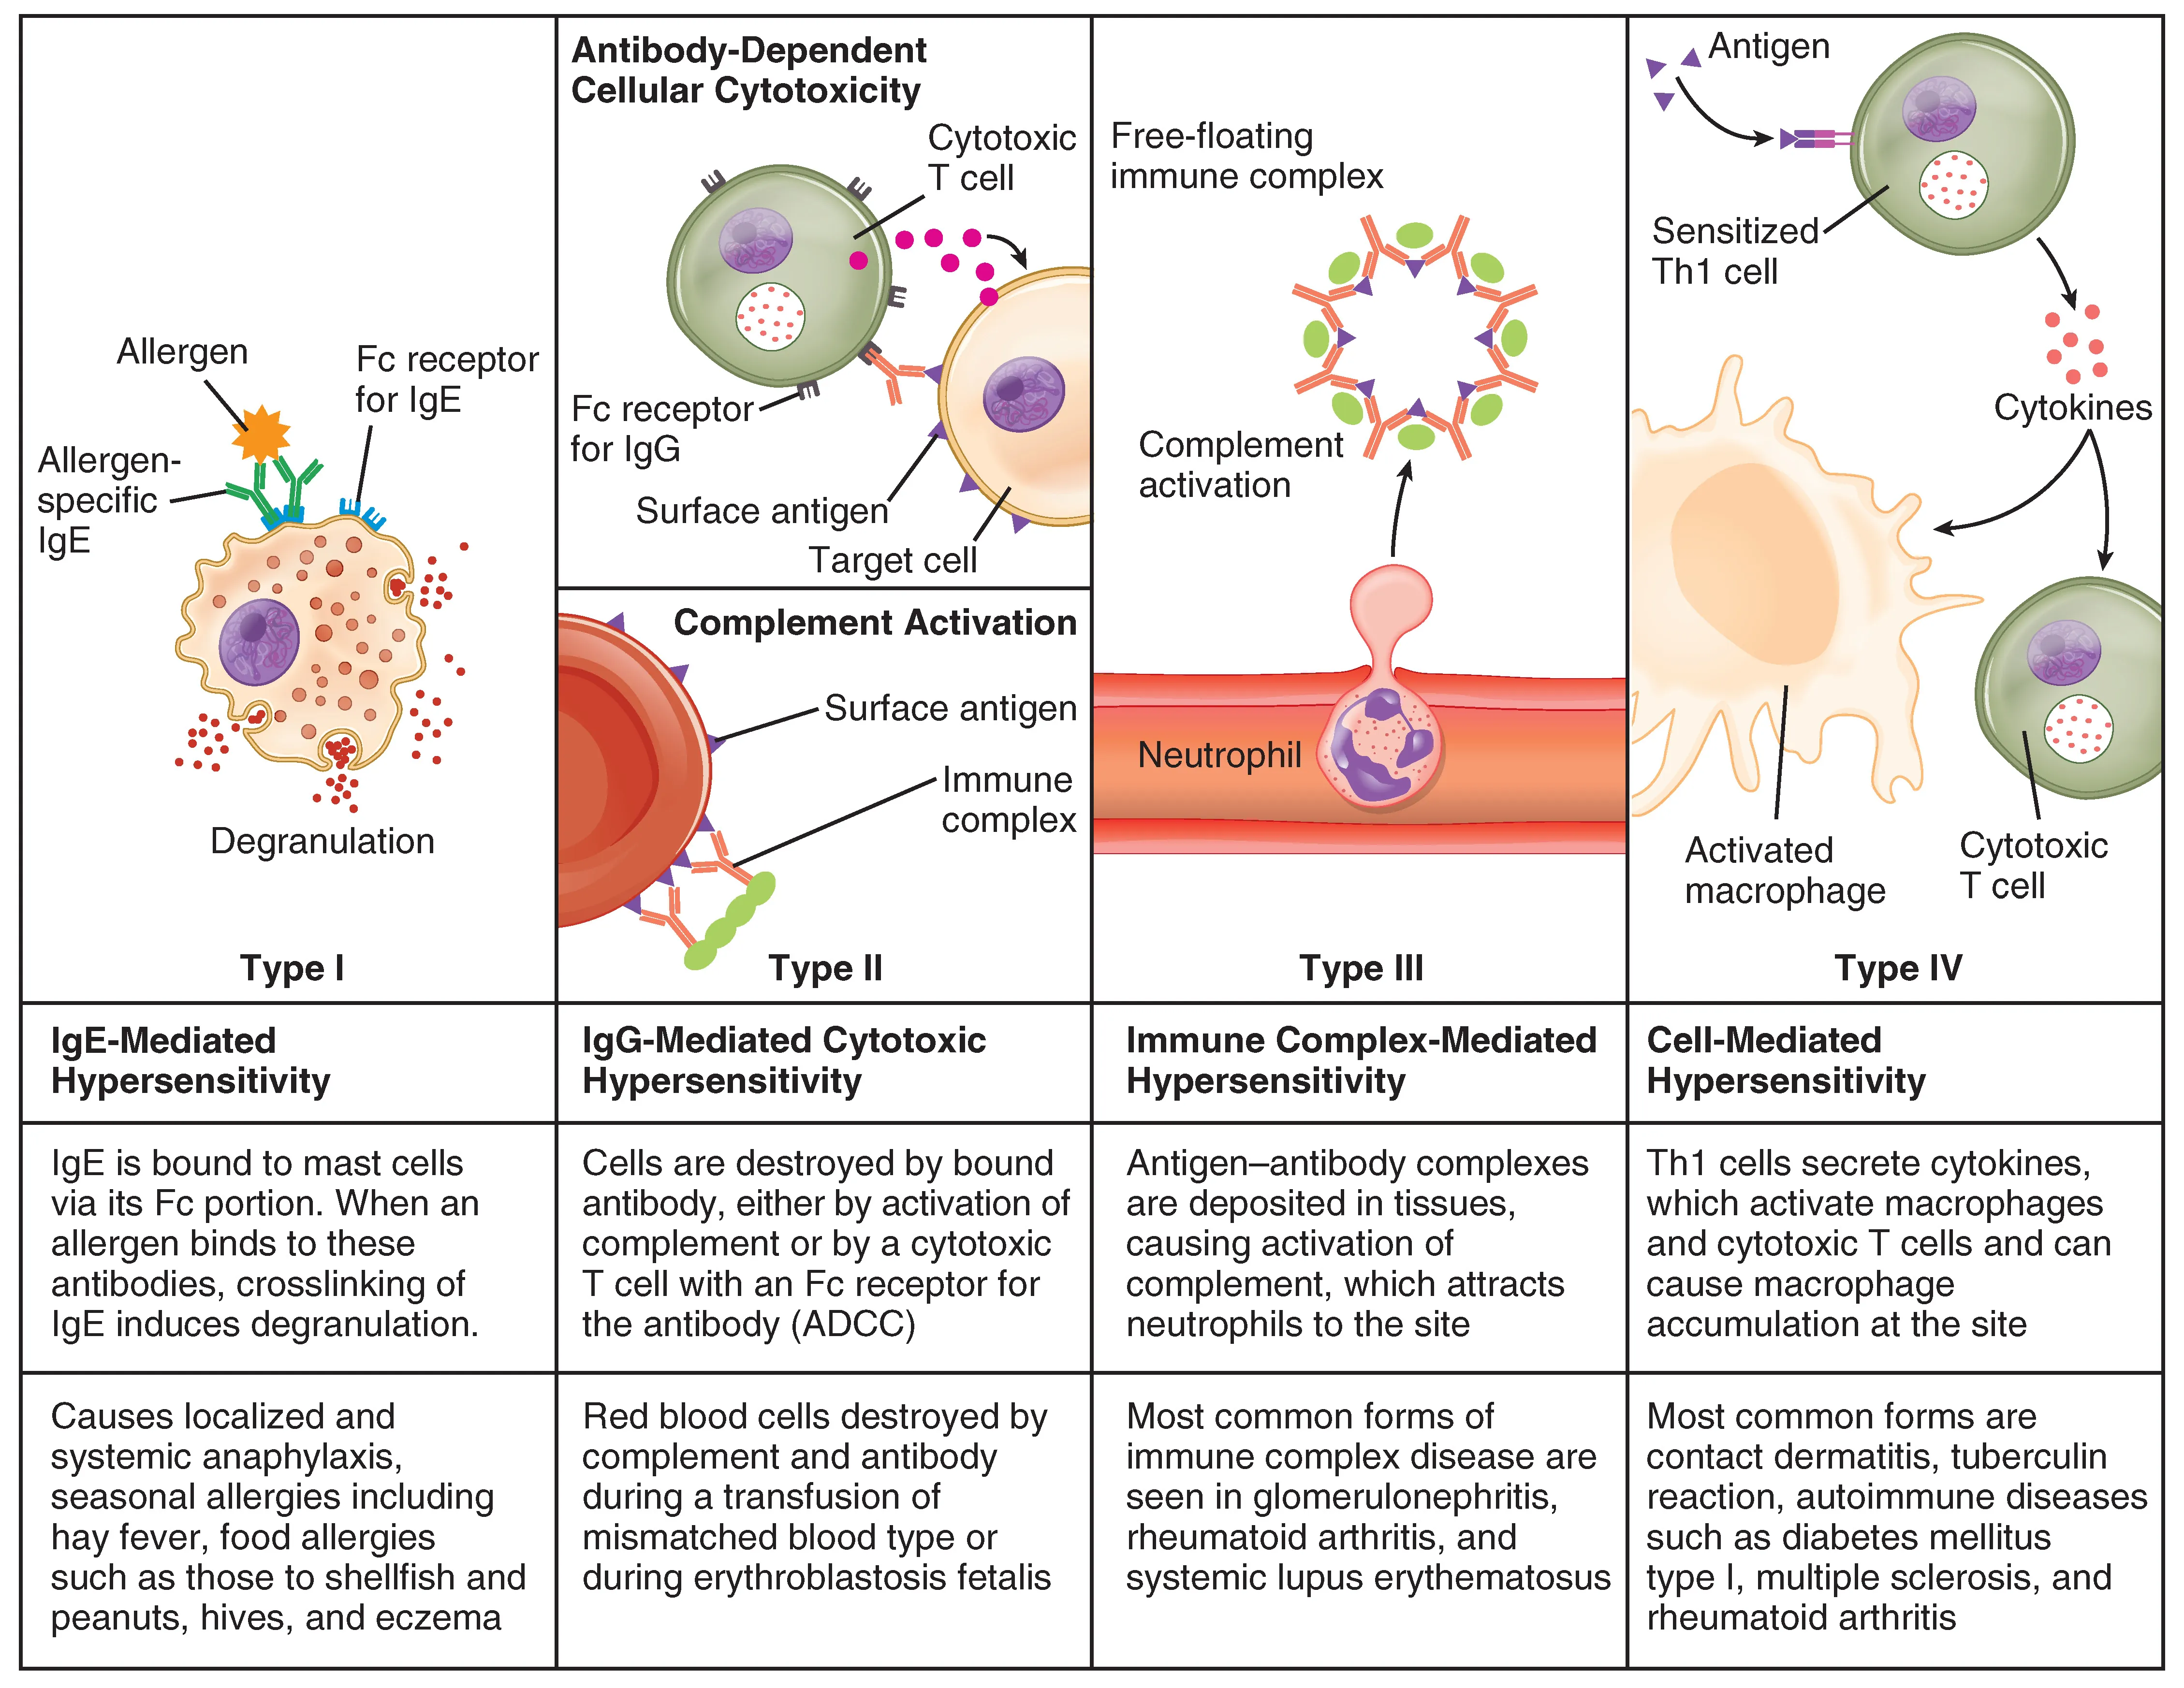 This table describes different types of hypersensitivity. In Type I (IgE-Mediated Hypersensitivity), IgE is bound to mast cells via its Fc portion. When an allergen binds to these antibodies, crosslinking of IgE induces degranulation. Type I causes localized and systemic anaphylaxis, seasonal allergies including hay fever, food allergies such as those to shellfish and peanuts, hives, and eczema. In Type II (IgG-Mediated Hypersensitivity), cells are destroyed by bound antibody, either by activation of complement or by a cytotoxic T cell with an Fc receptor for the antibody (ADCC). Examples are when red blood cells are destroyed by complement and antibody during a transfusion of mismatched blood types or during erythroblastosis fetalis. In Type III (Immune Complex-Mediated Hypersensitivity), antigen-antibody complexes are deposited in tissues, causing activation of complement, which attracts neutrophils to the site. Most common forms of immune complex disease are seen in glomerulonephritis, rheumatoid arthritis, and systemic lupus erythematosus. In Type IV (Cell-Mediated Hypersensitivity), Th1 cells secrete cytokines, which activate macrophages and cytotoxic T cells and can cause macrophage accumulation at the site. Most common forms are contact dermatitis, tuberculin reaction, and autoimmune diseases such as diabetes mellitus type I, multiple sclerosis, and rheumatoid arthritis.